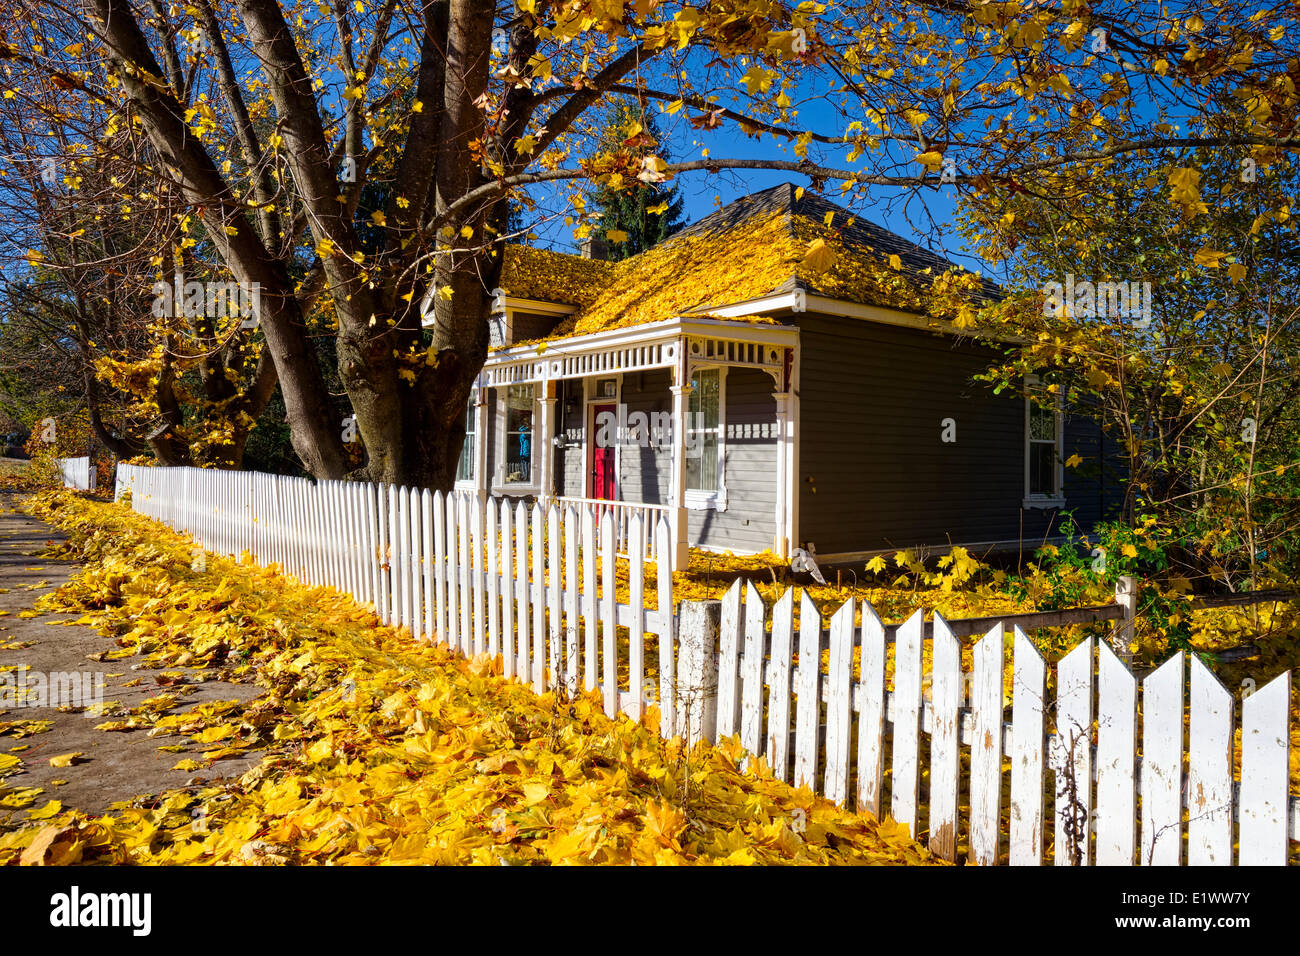 Armstrong BC,Beautiful Autumn Scene with afternoon sun. Colorful yellow leaves on Ground around white picket fence and house Stock Photo